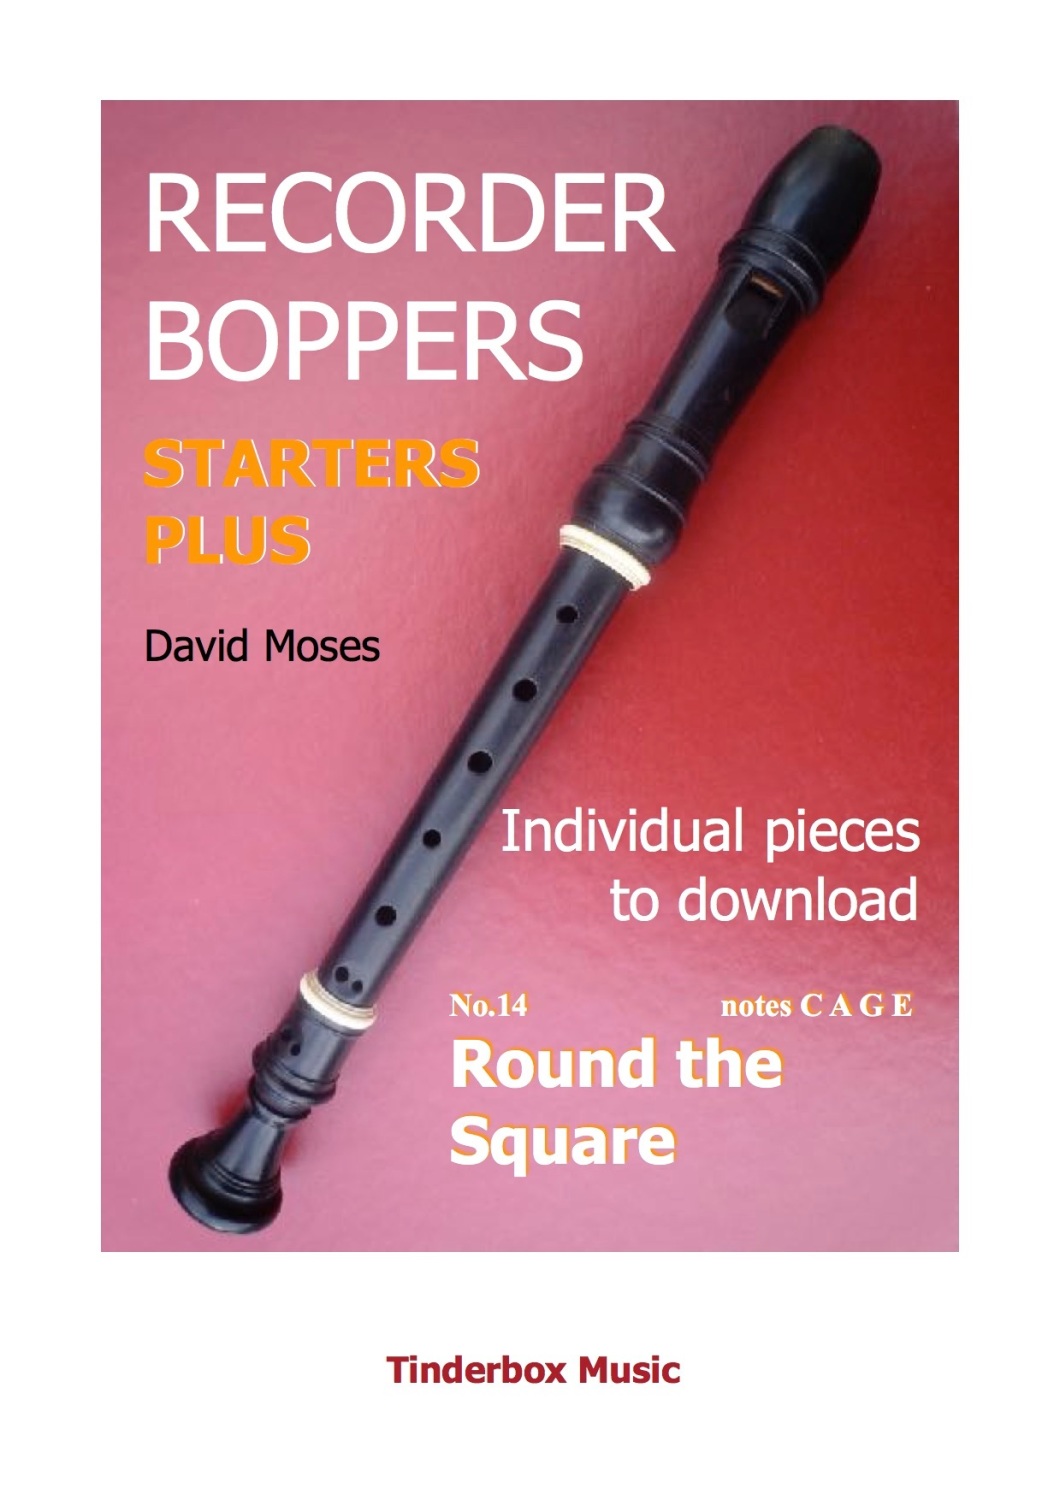 STARTERS PLUS individual pieces no.14 ROUND THE SQUARE  download